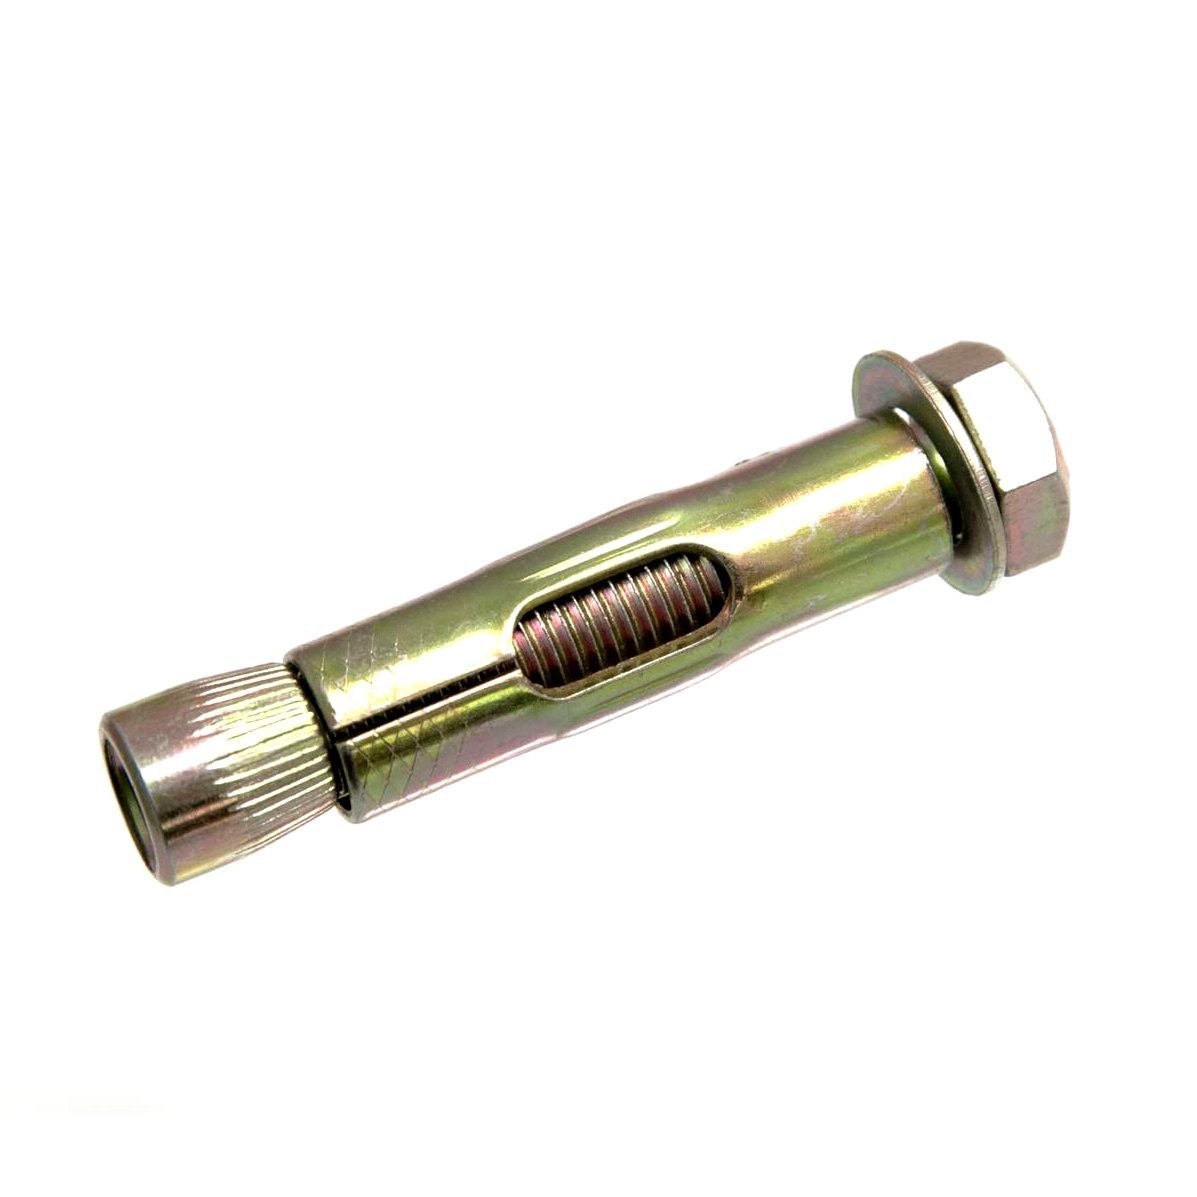 Grade 8 Steel Hex Bolts: The Industry Standard for Durability